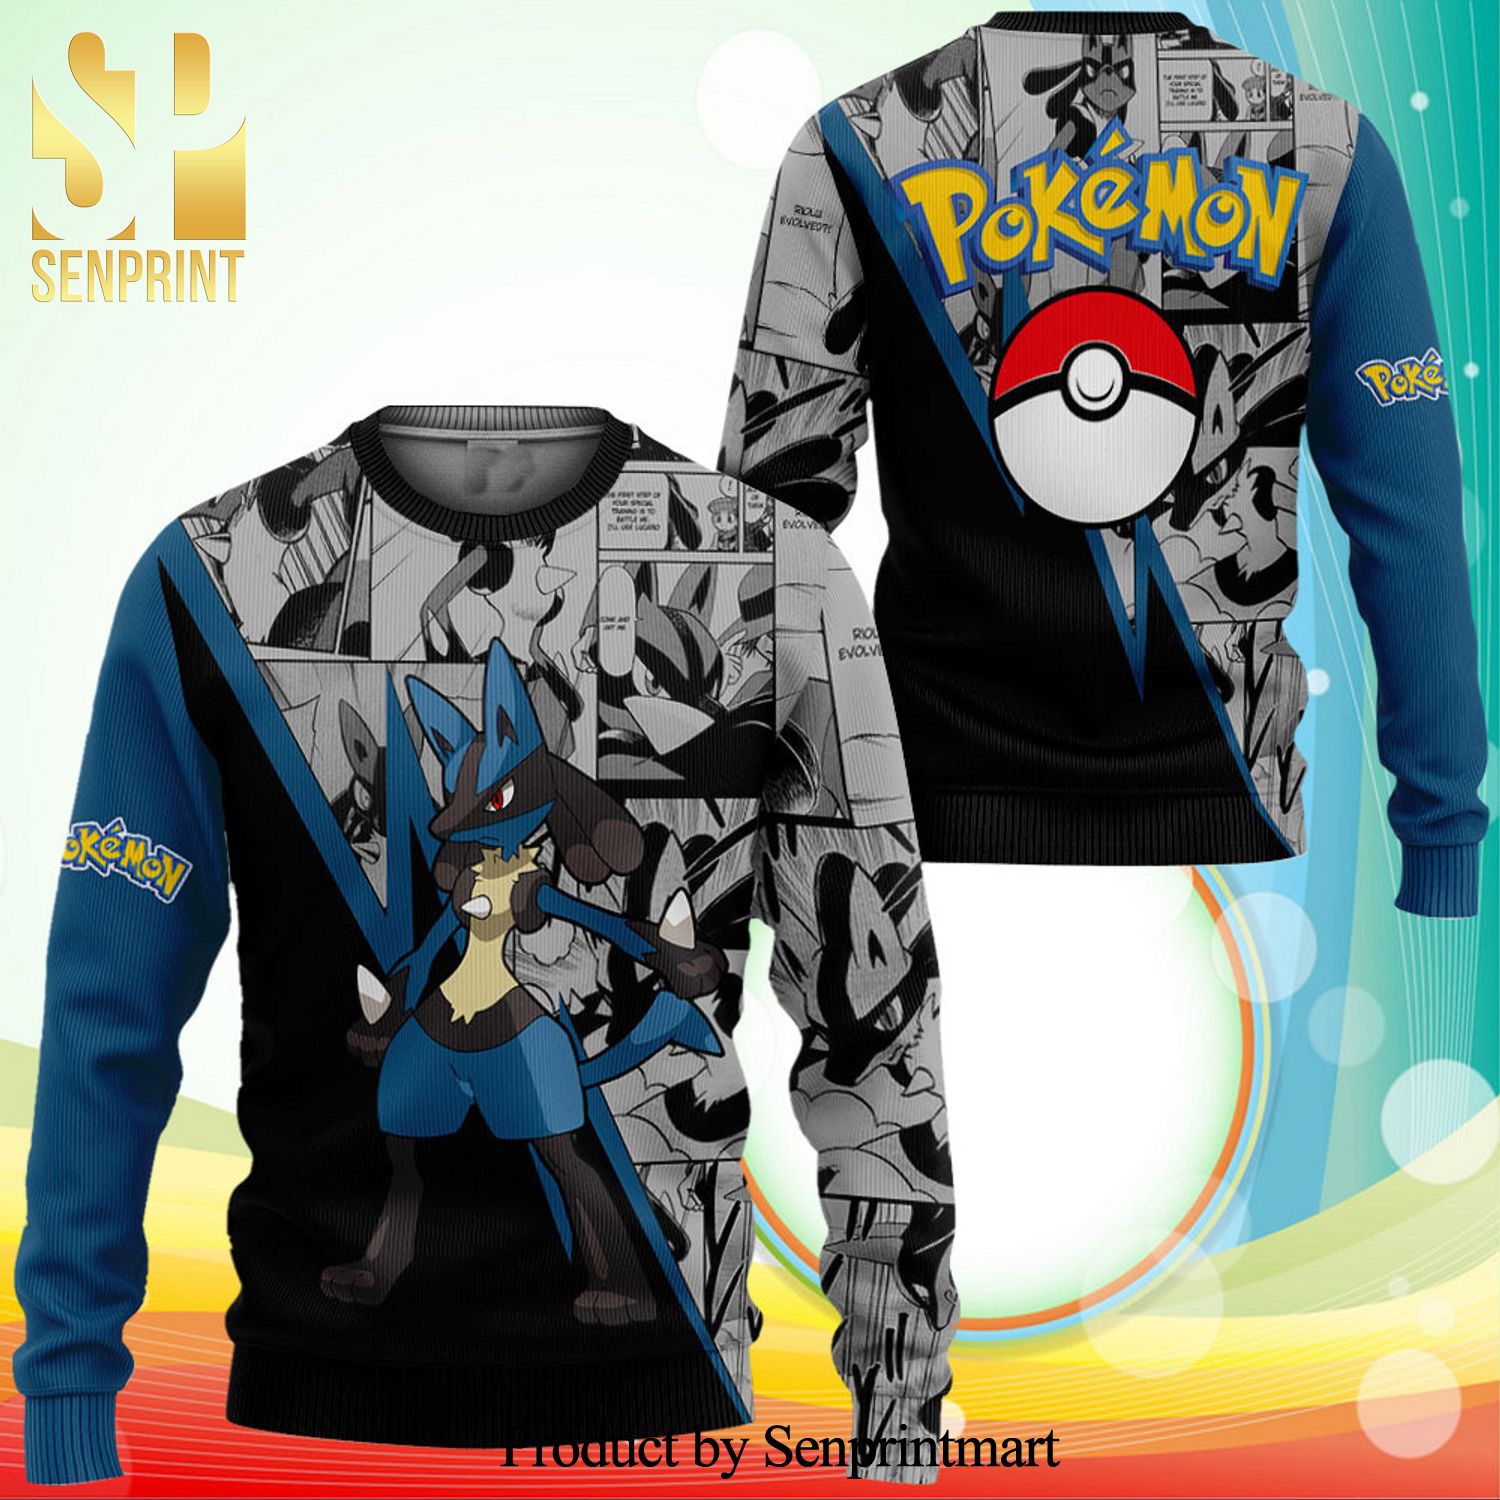 Lucario Anime Pokemon Knitted Ugly Christmas Sweater